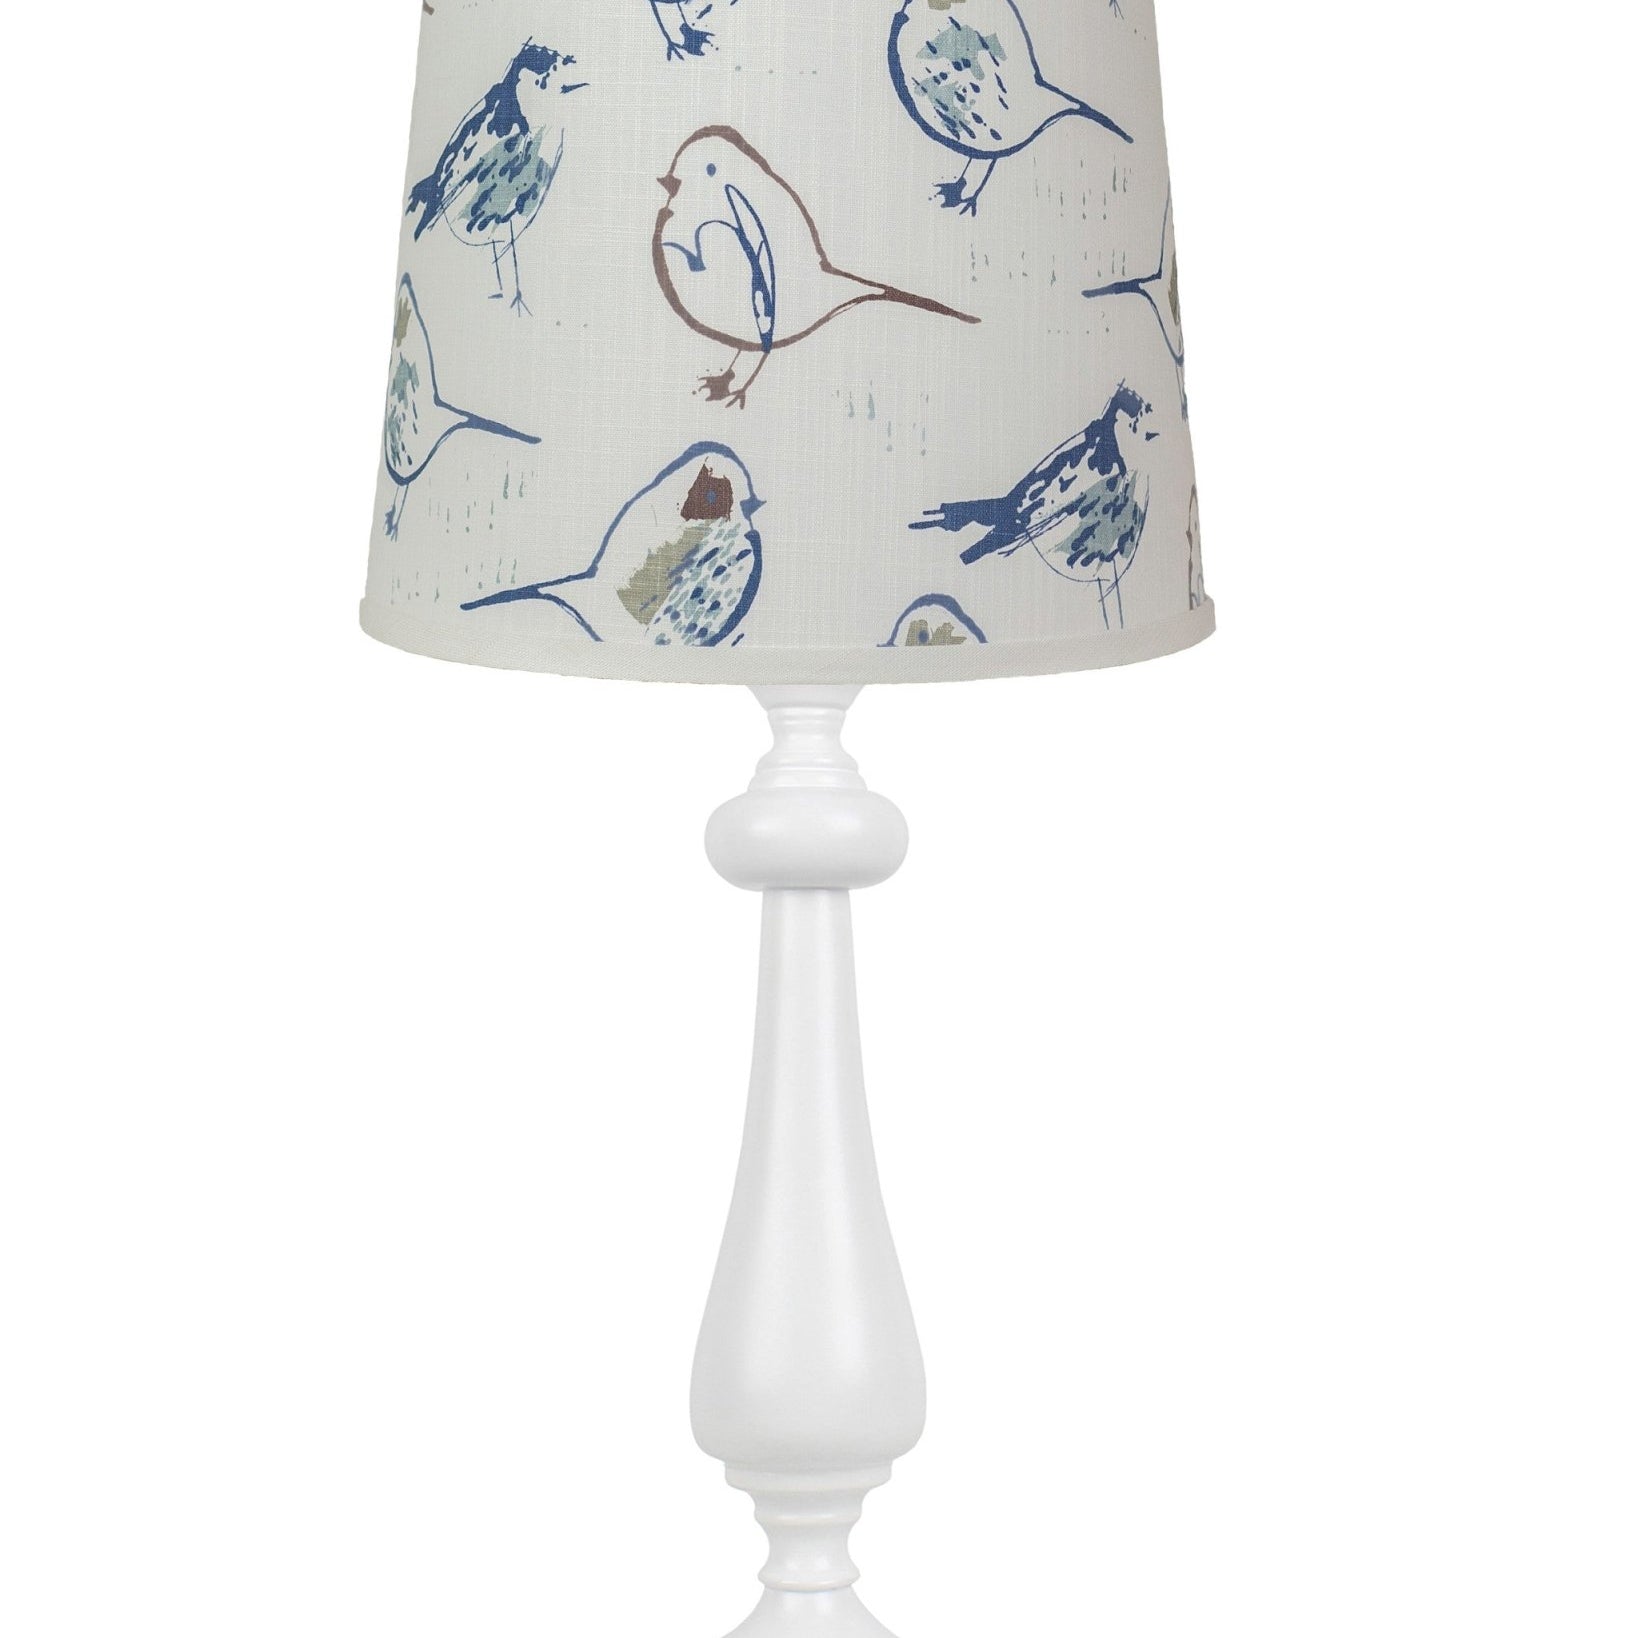 27" White Table Lamp With White Blue And Brown Birds Empire Shade - Tuesday Morning-Table Lamps